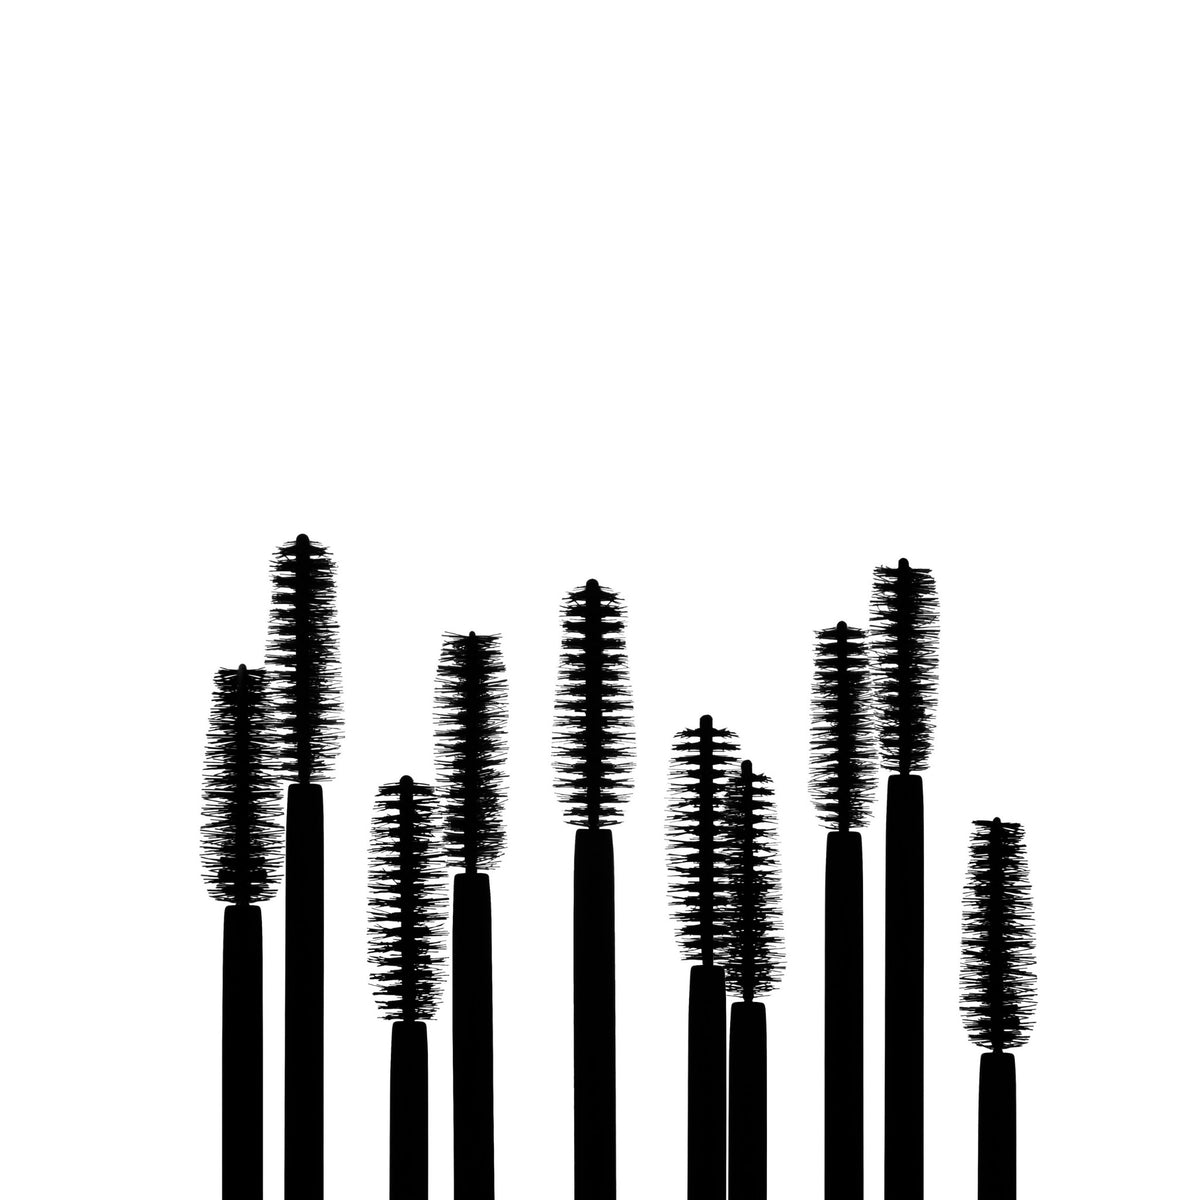 Laura Mercier Caviar Volume Panoramic Mascara . This product is in the color black